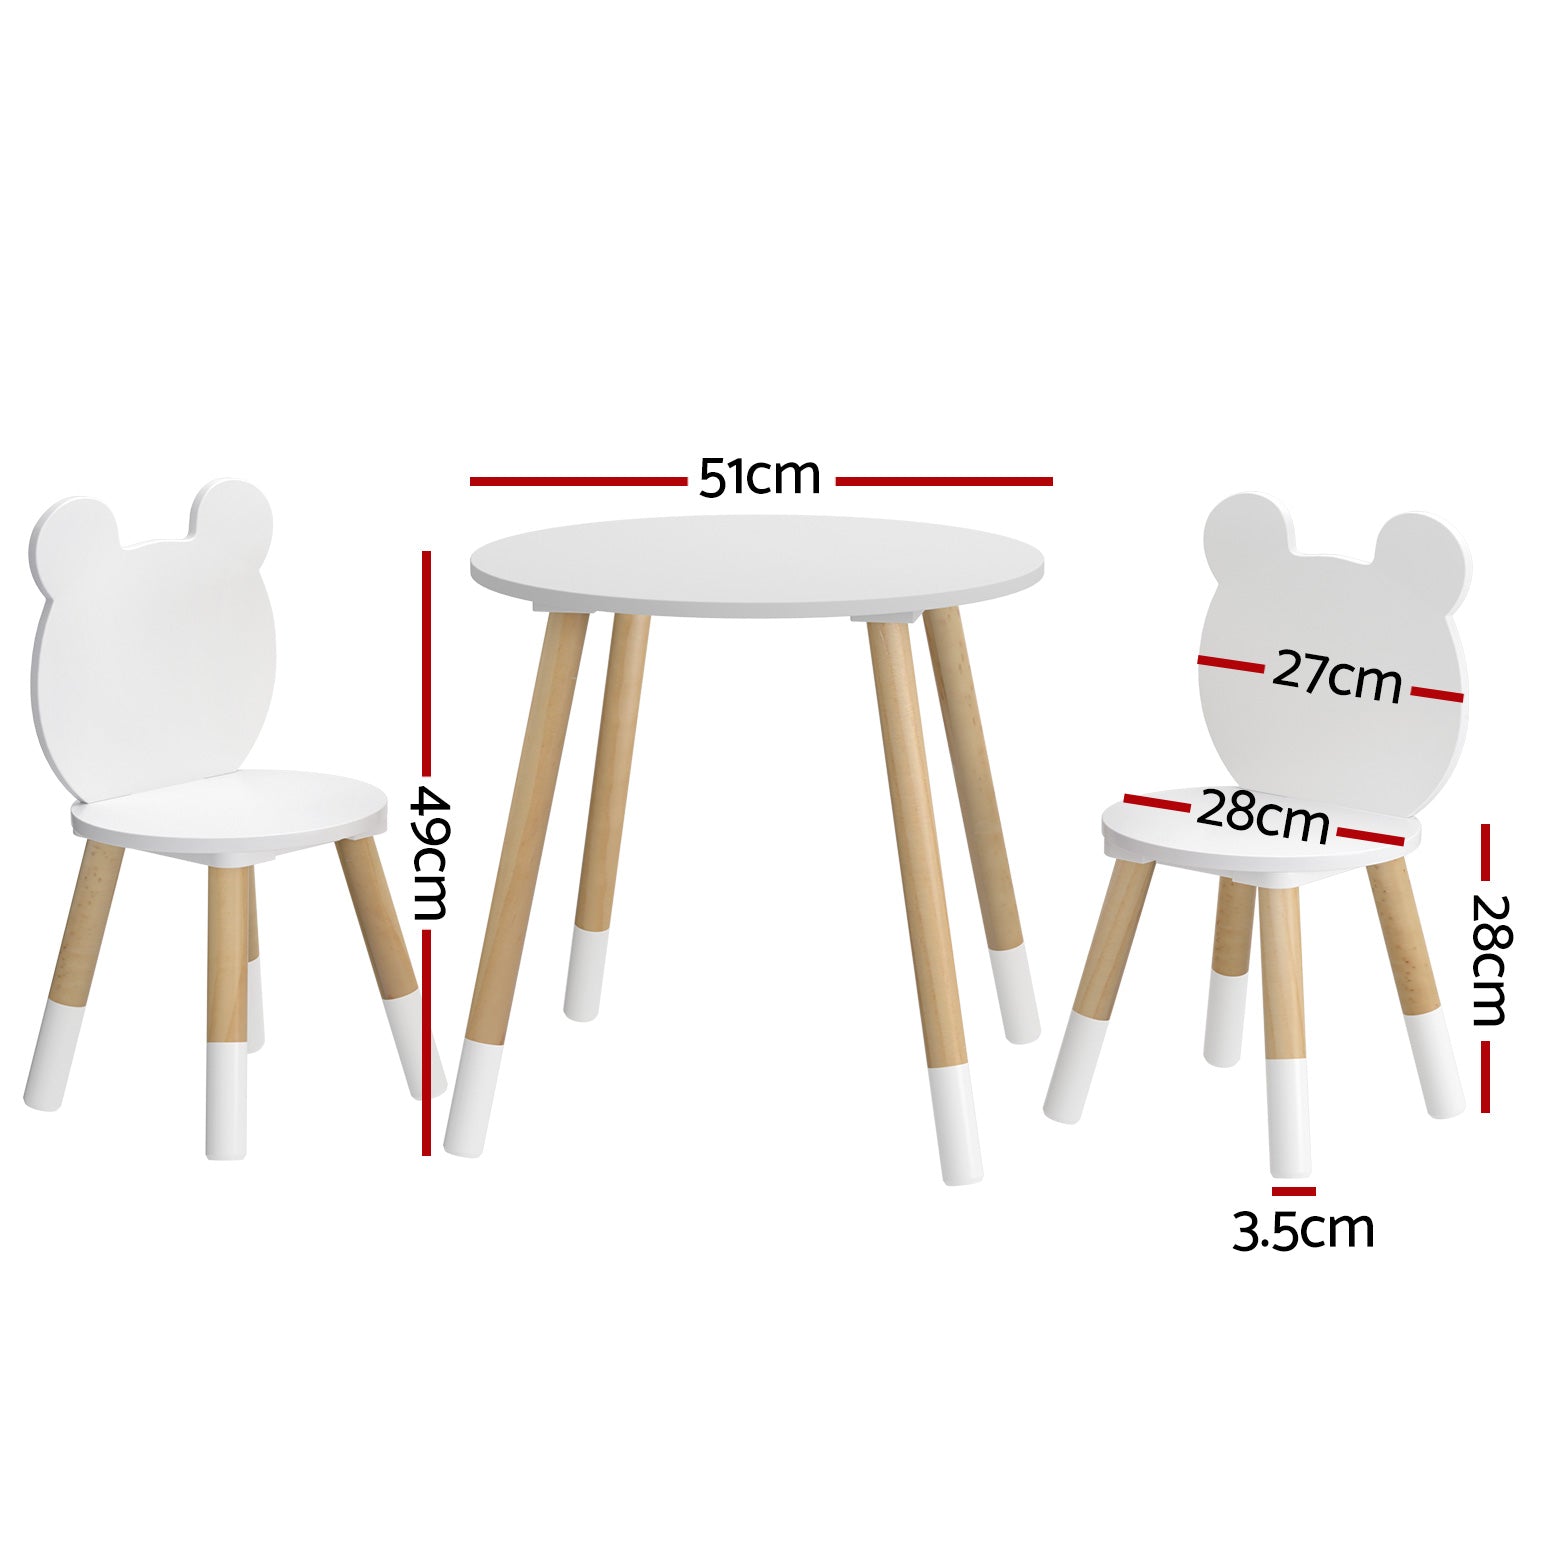 Keezi 3 Piece Kids Table and Chairs Set Activity Playing Study Children Desk - SILBERSHELL